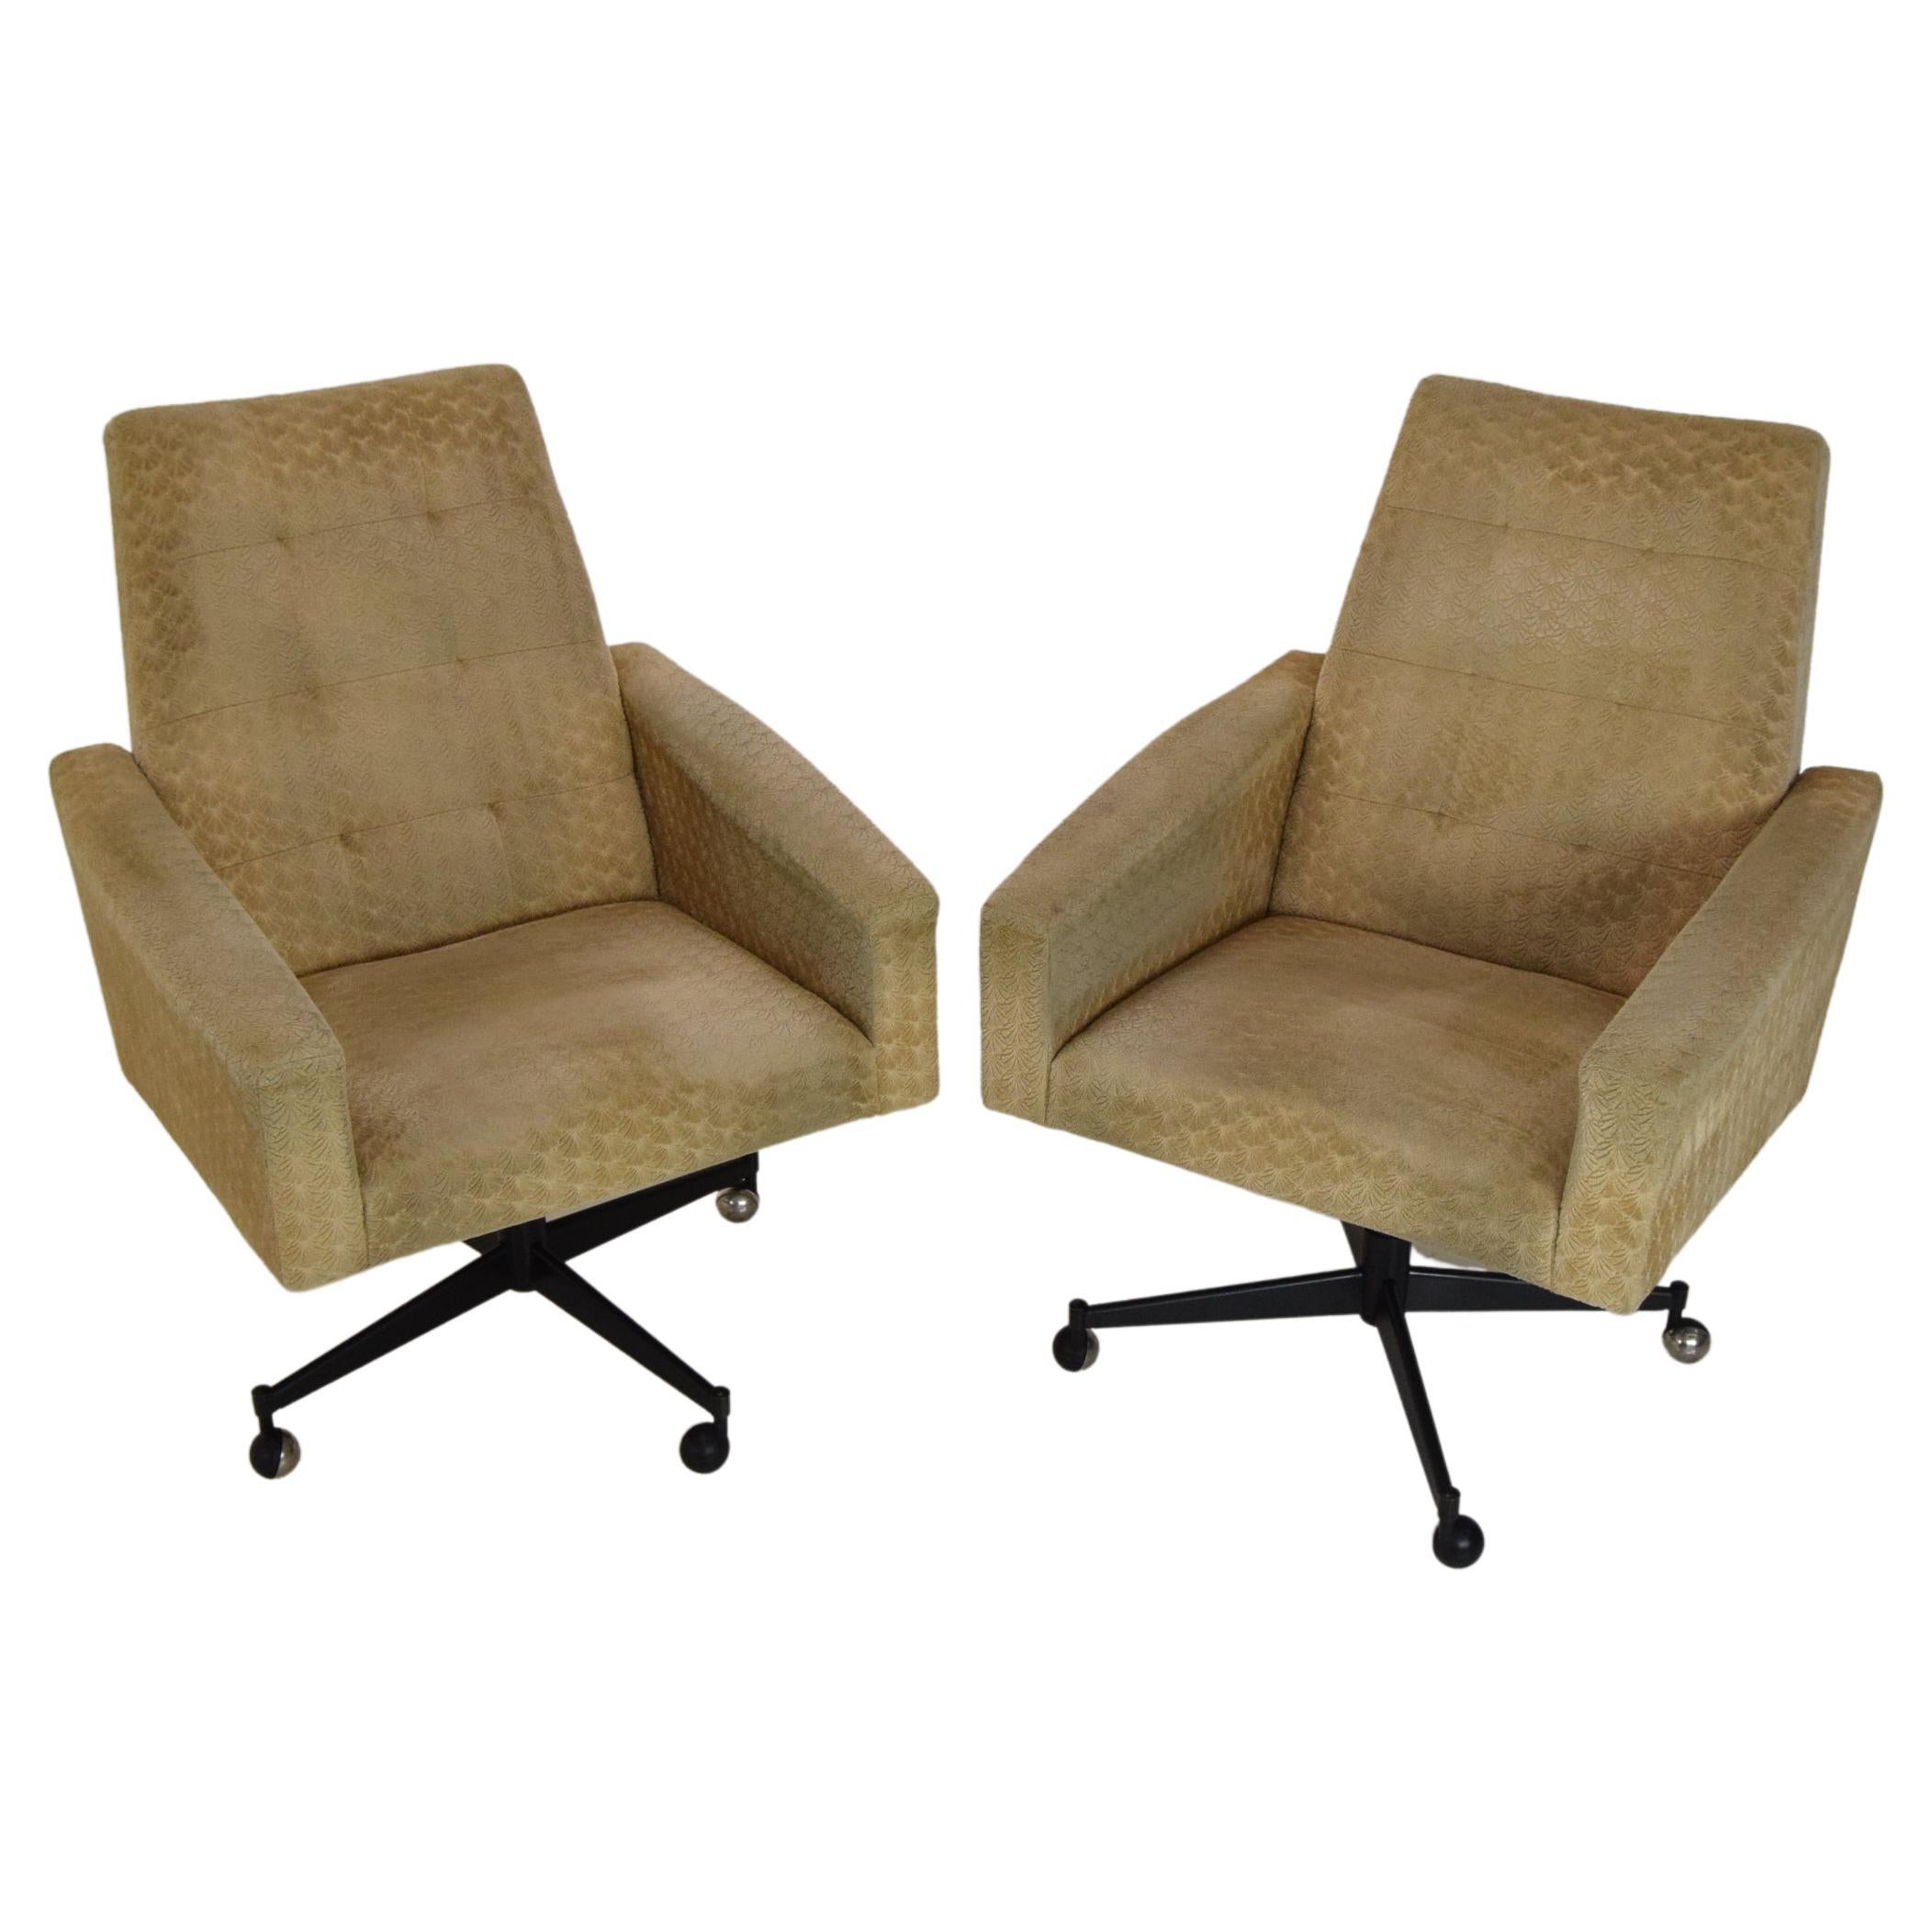 Pair of Midcentury Swivel Armchairs with Wheels, 1970s. 